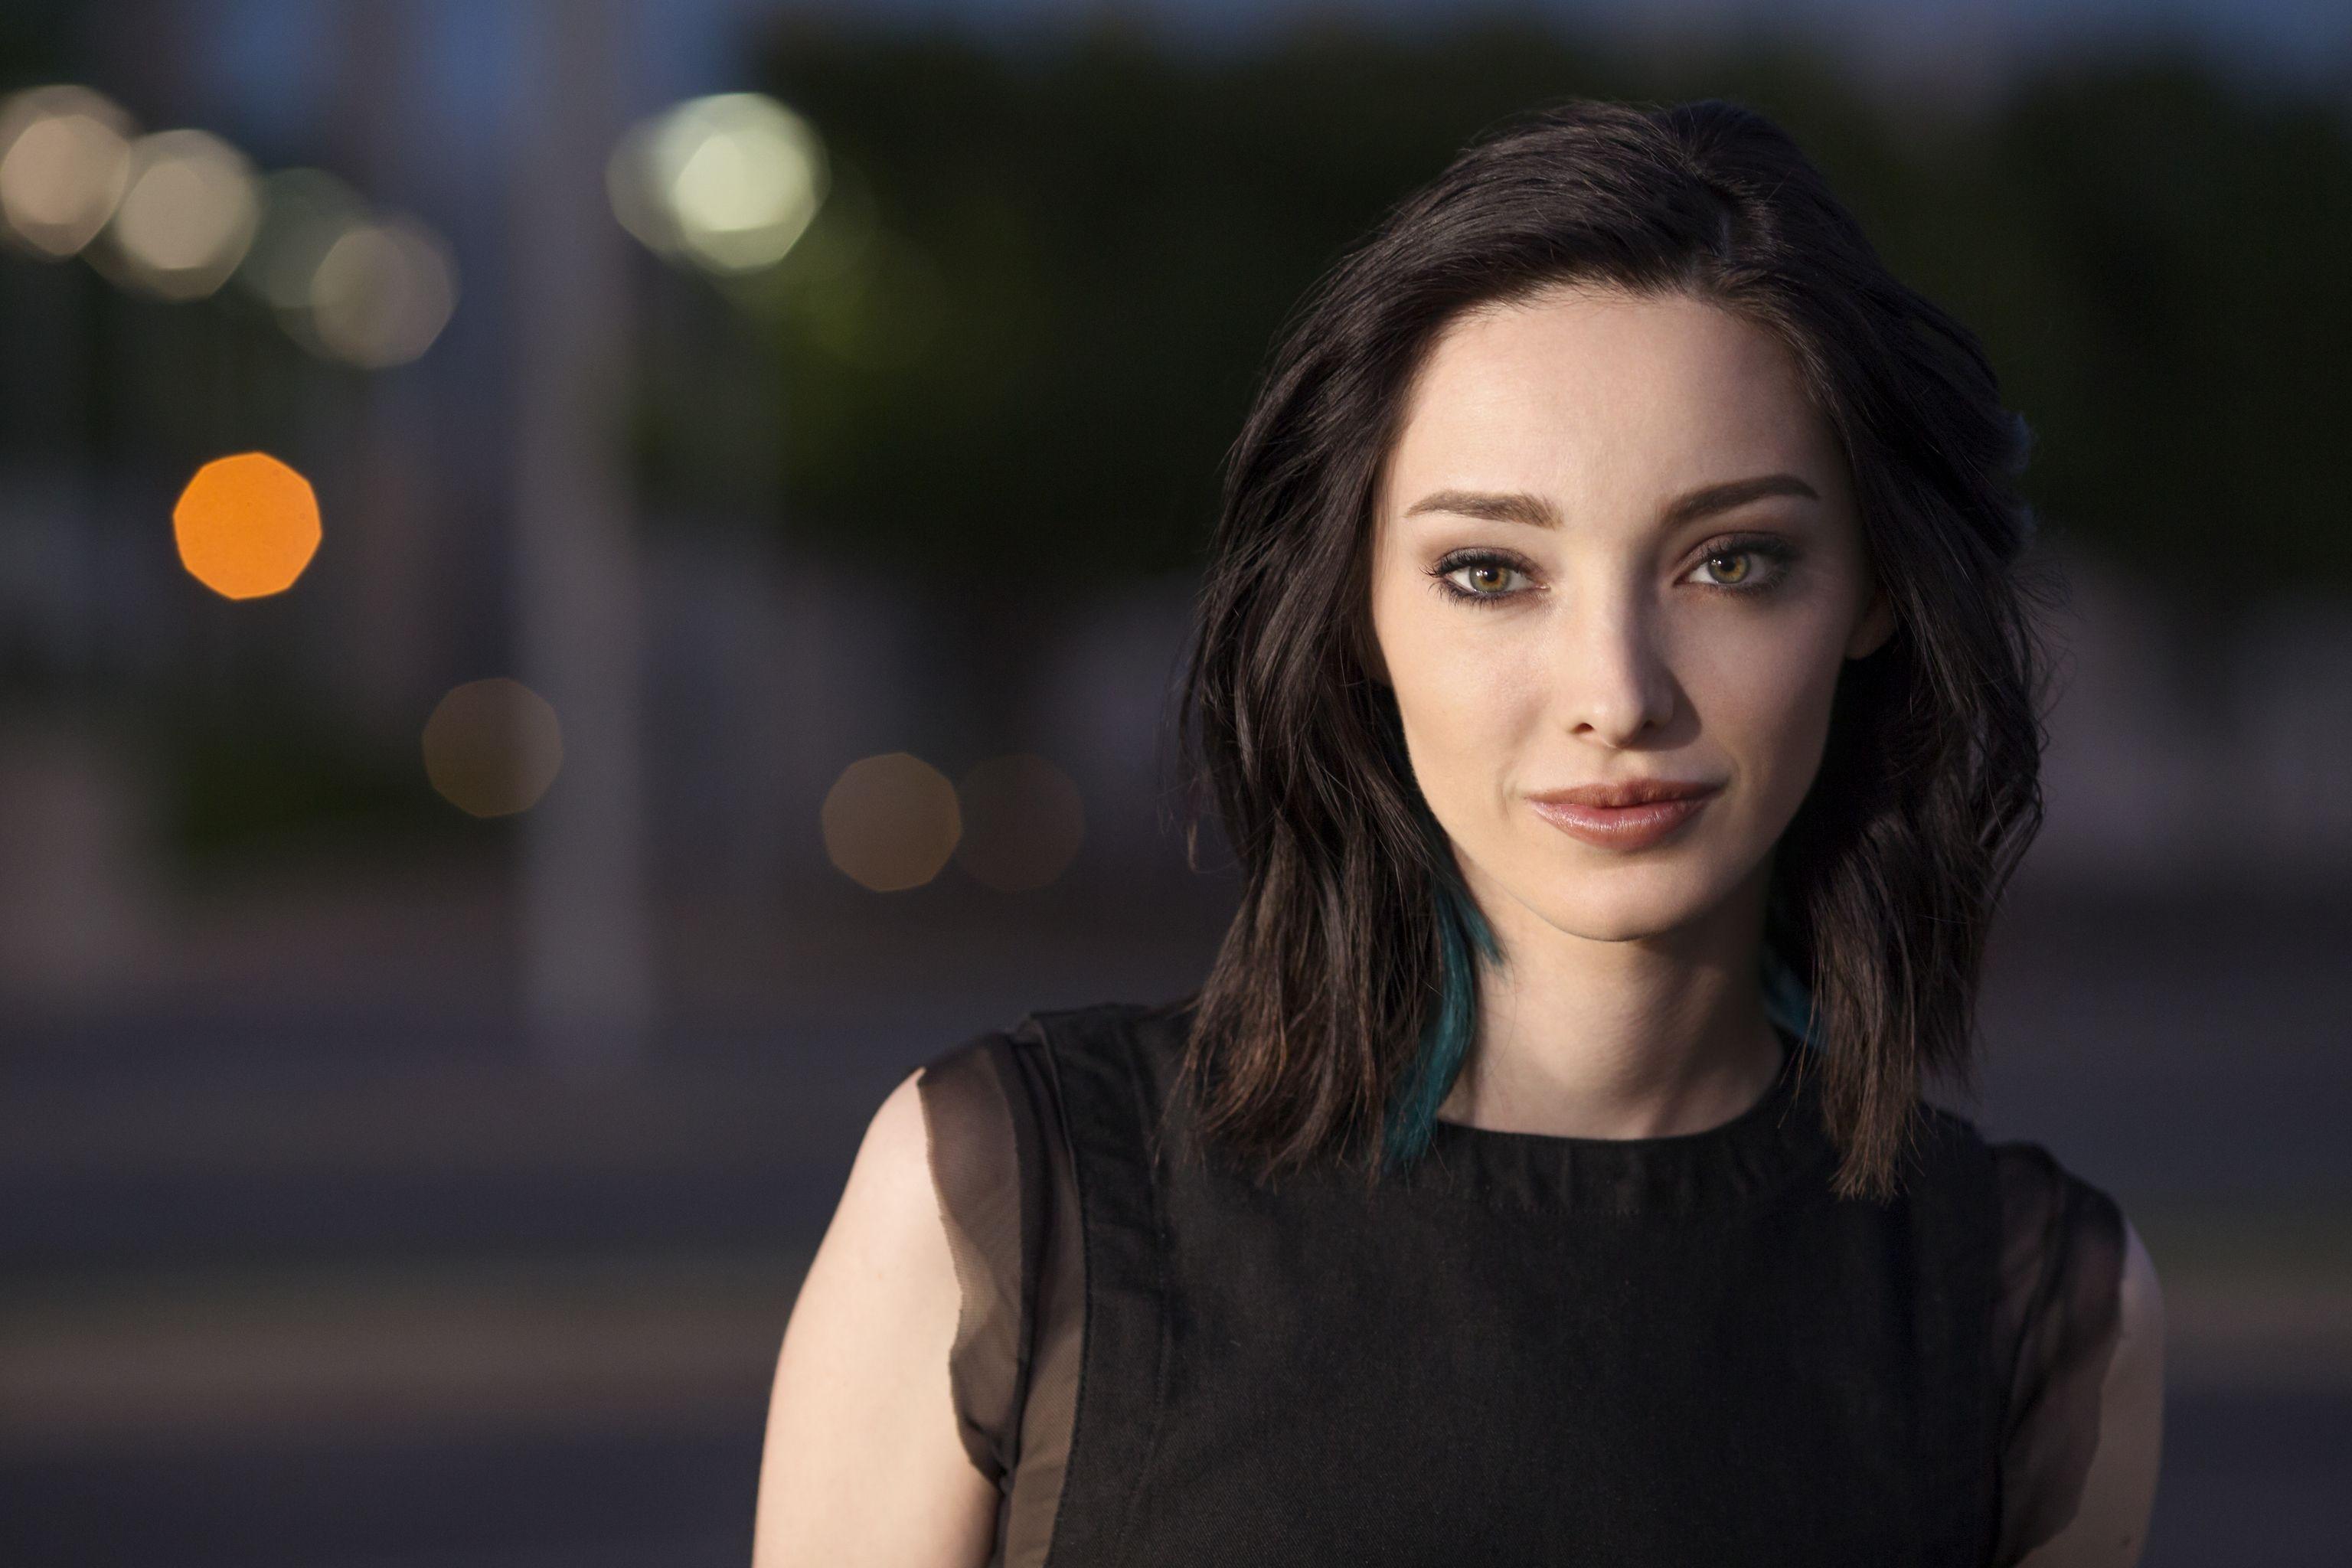 Emma Dumont The Gifted, HD Tv Shows, 4k Wallpaper, Image